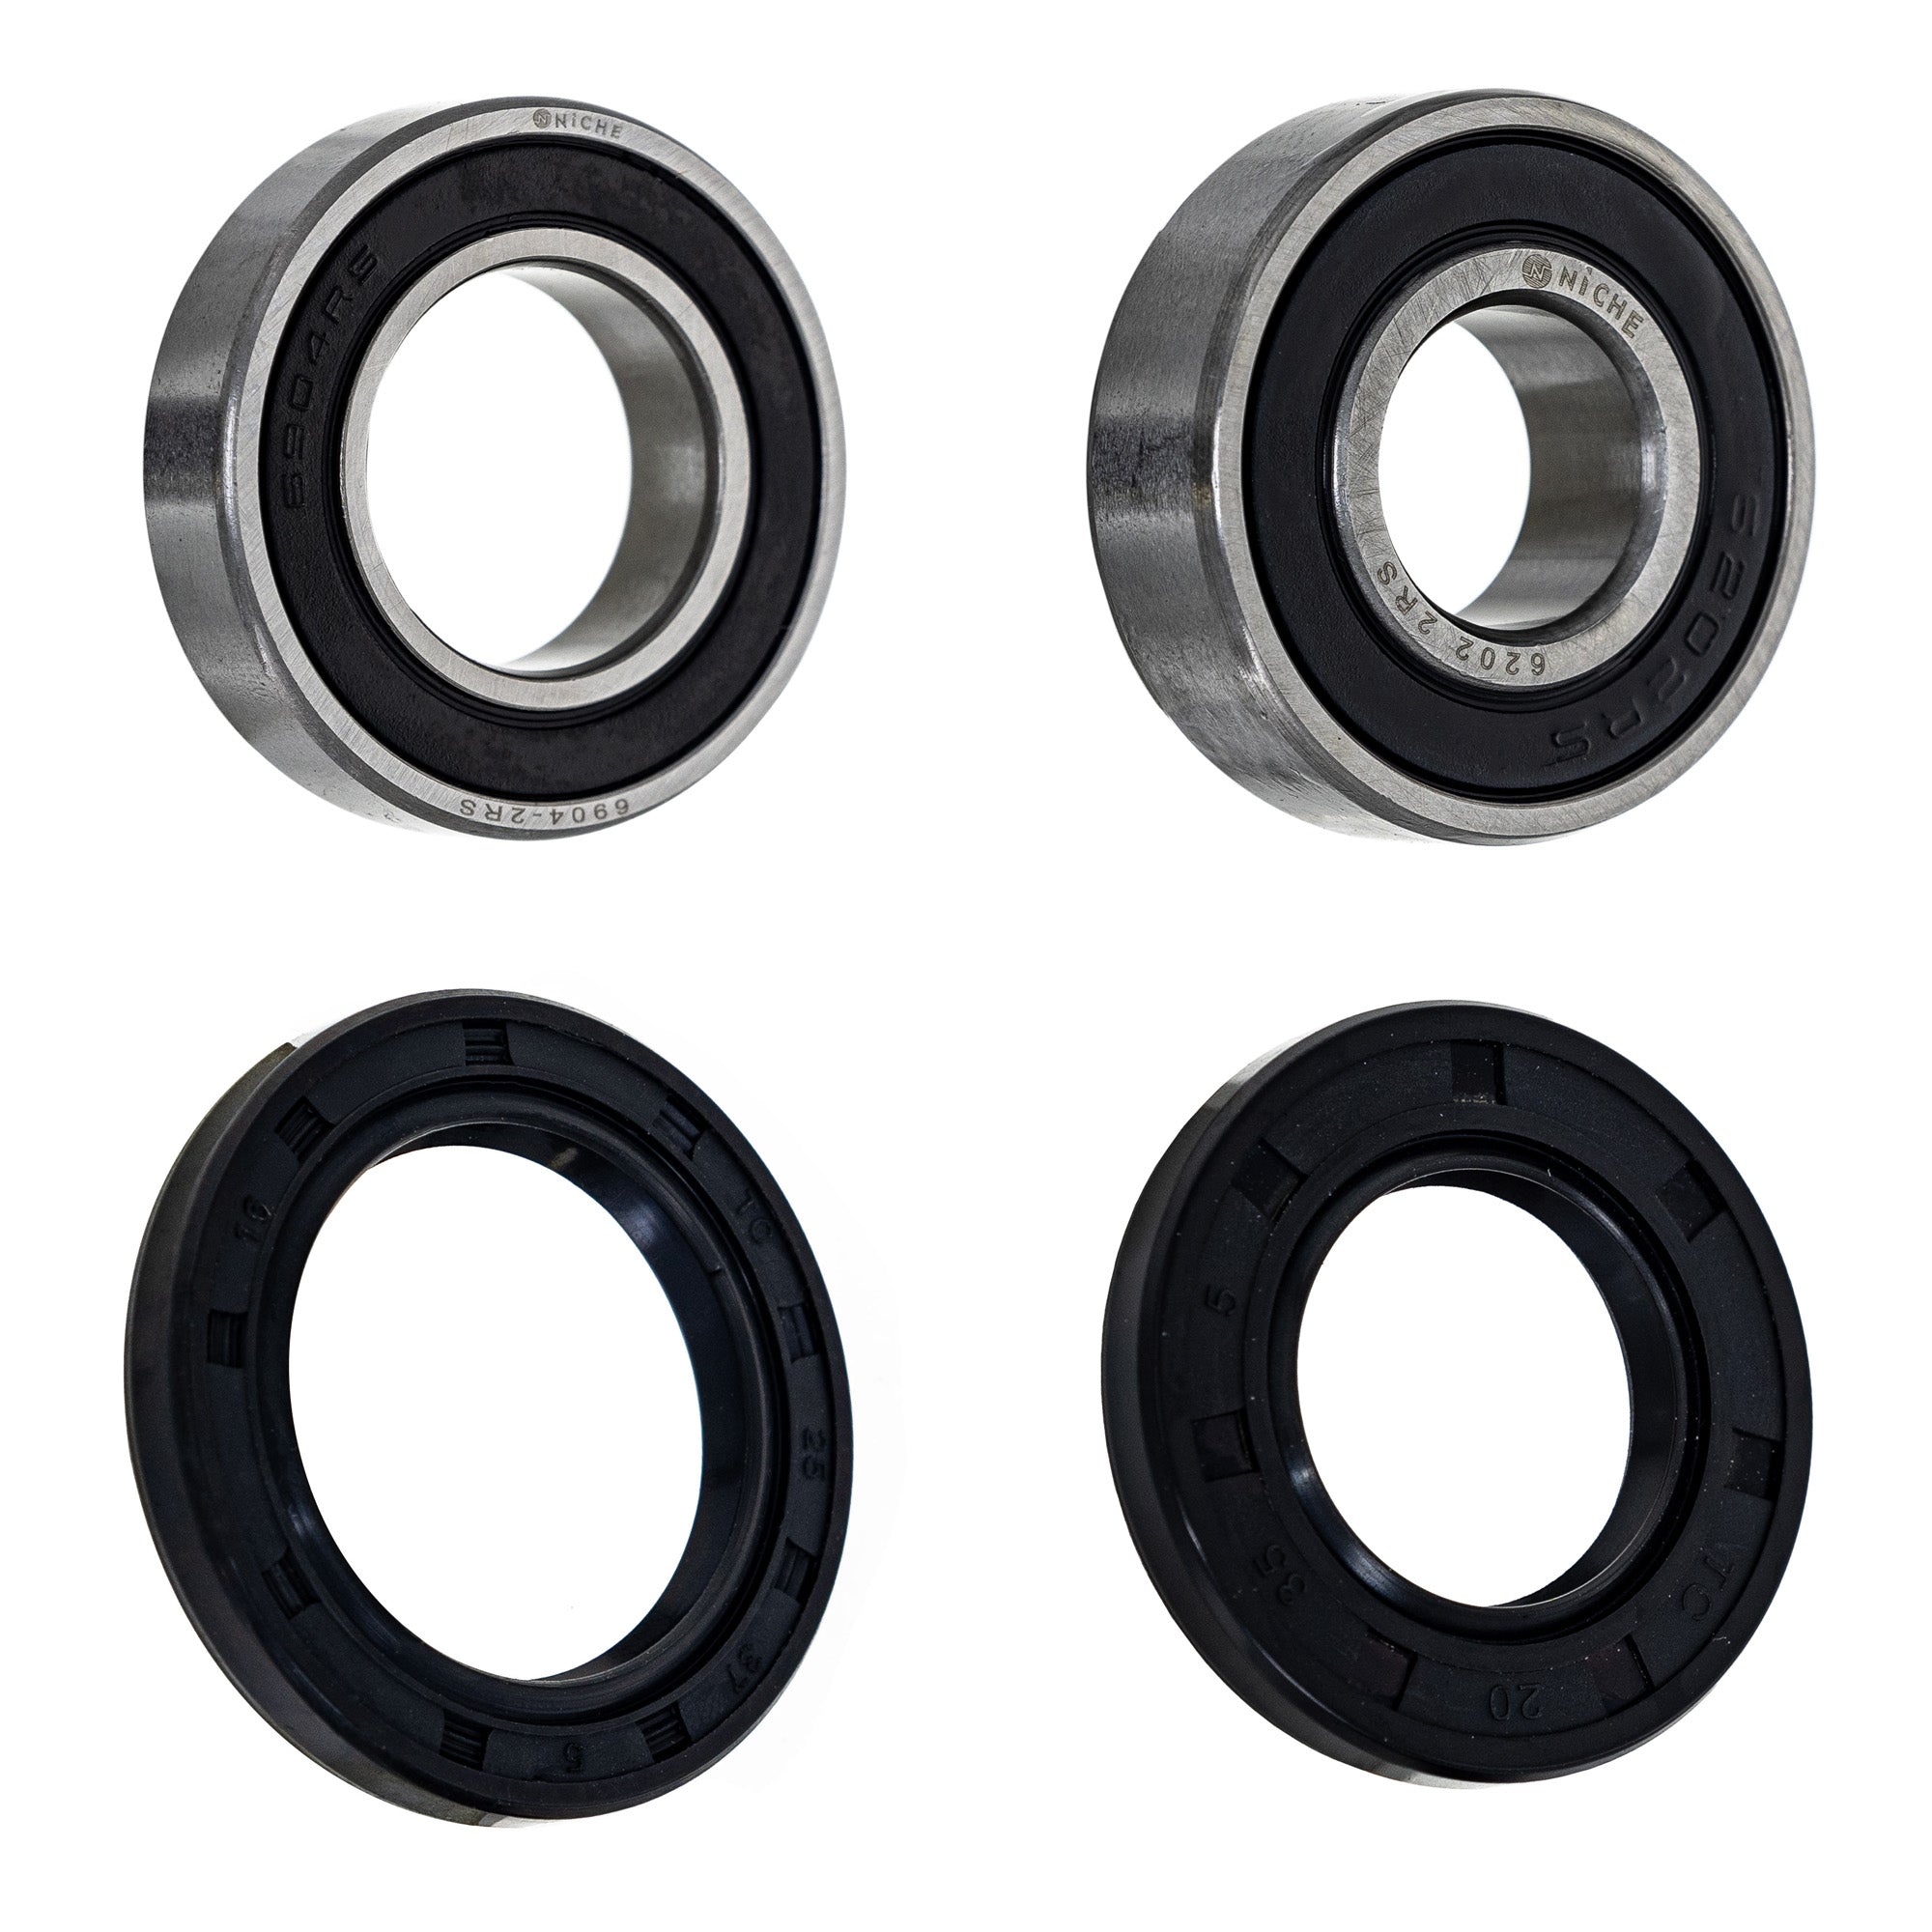 Wheel Bearing Seal Kit for zOTHER Ref No FourTrax NICHE MK1008840